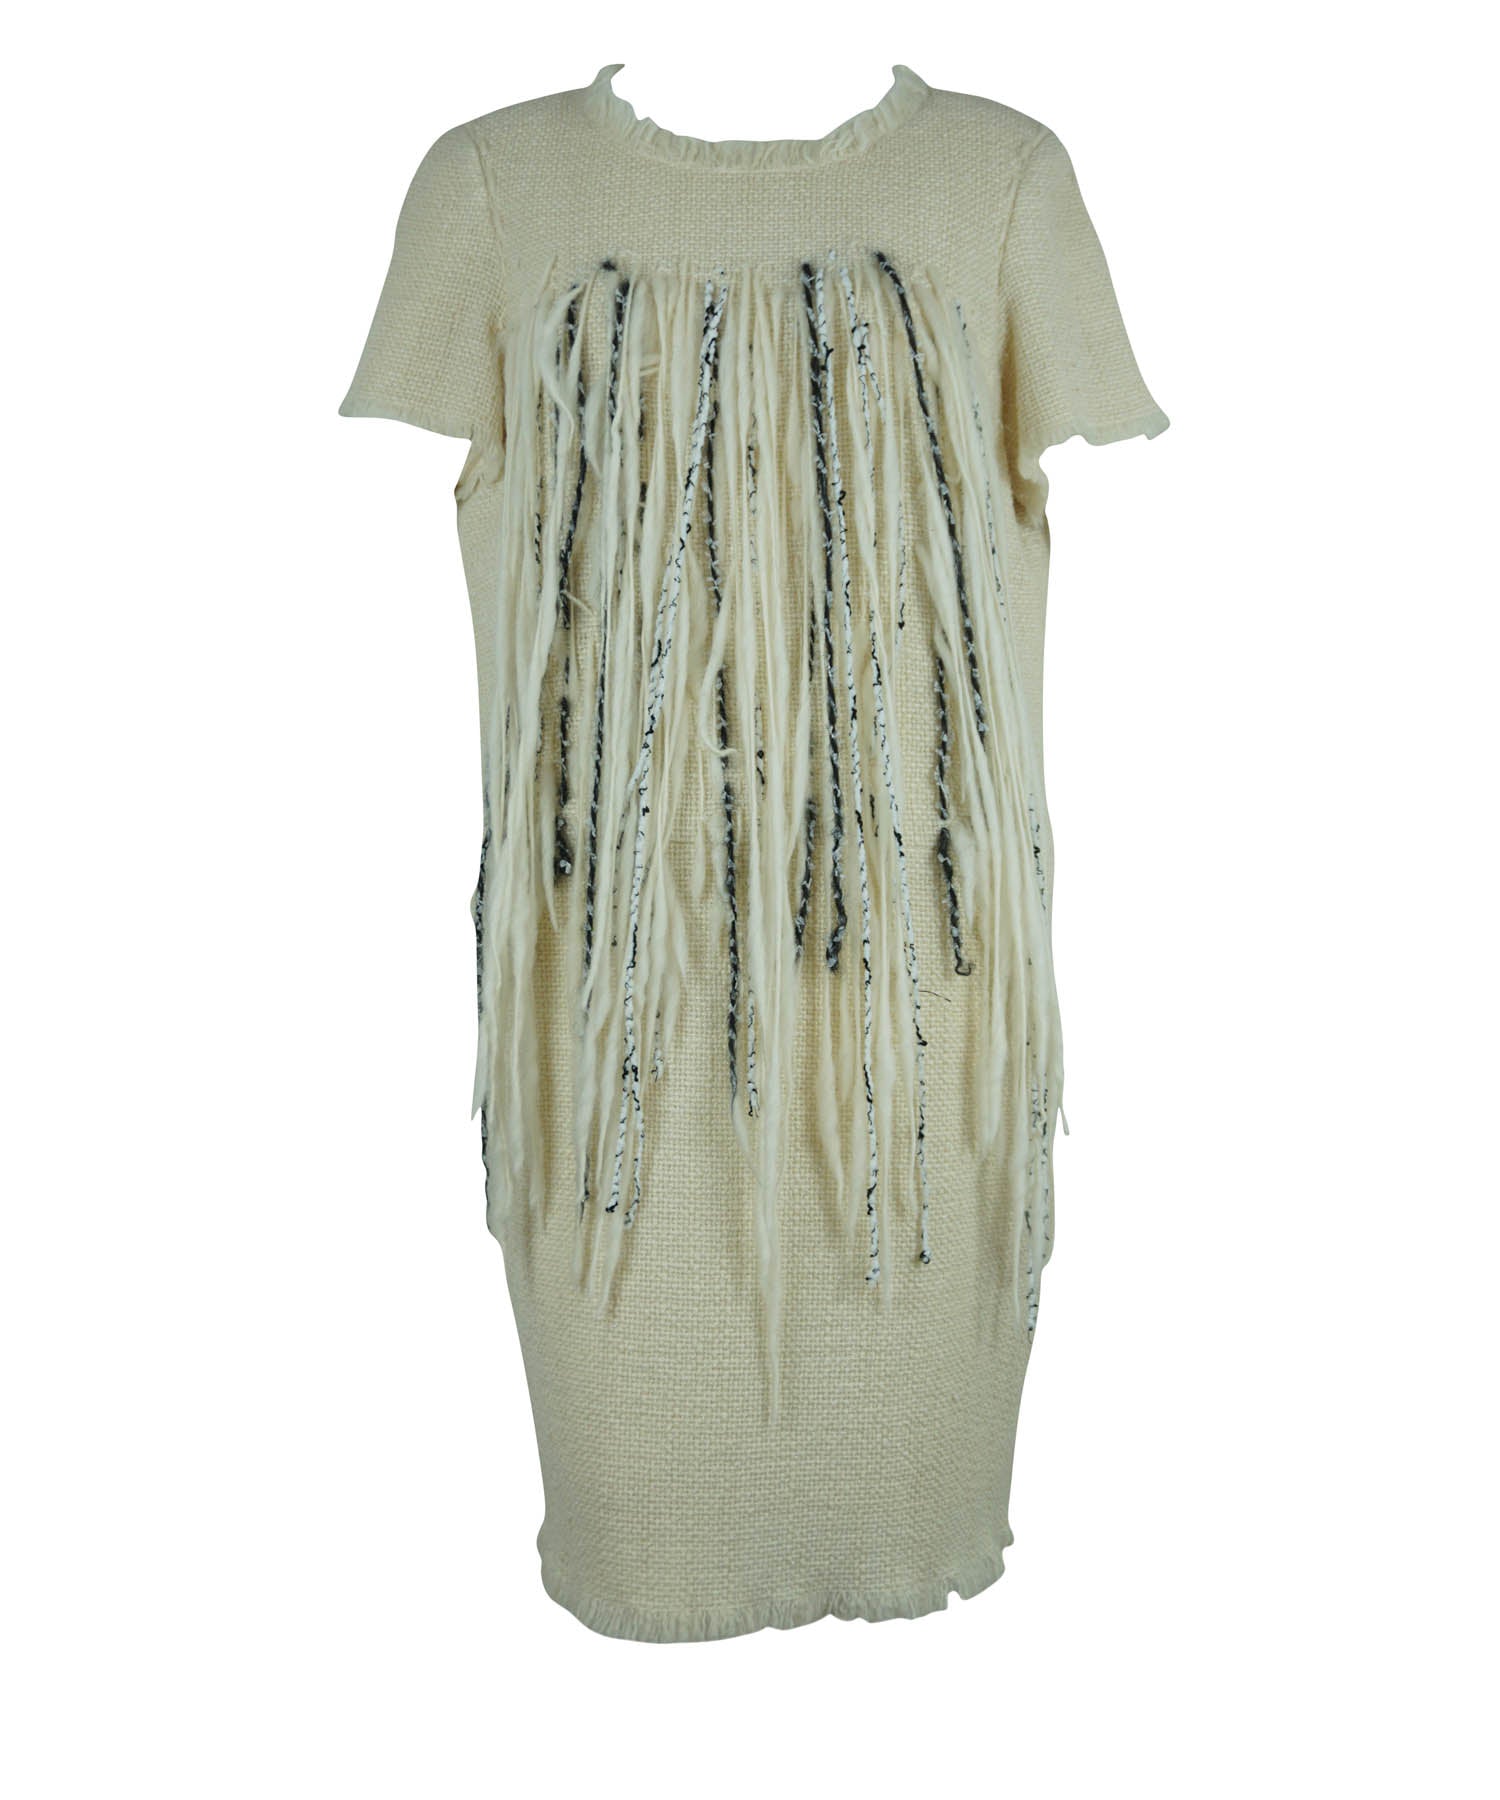 Chanel Tweed Dress with Pearl and Fringe Detail Sz 42 - Foxy Couture Carmel